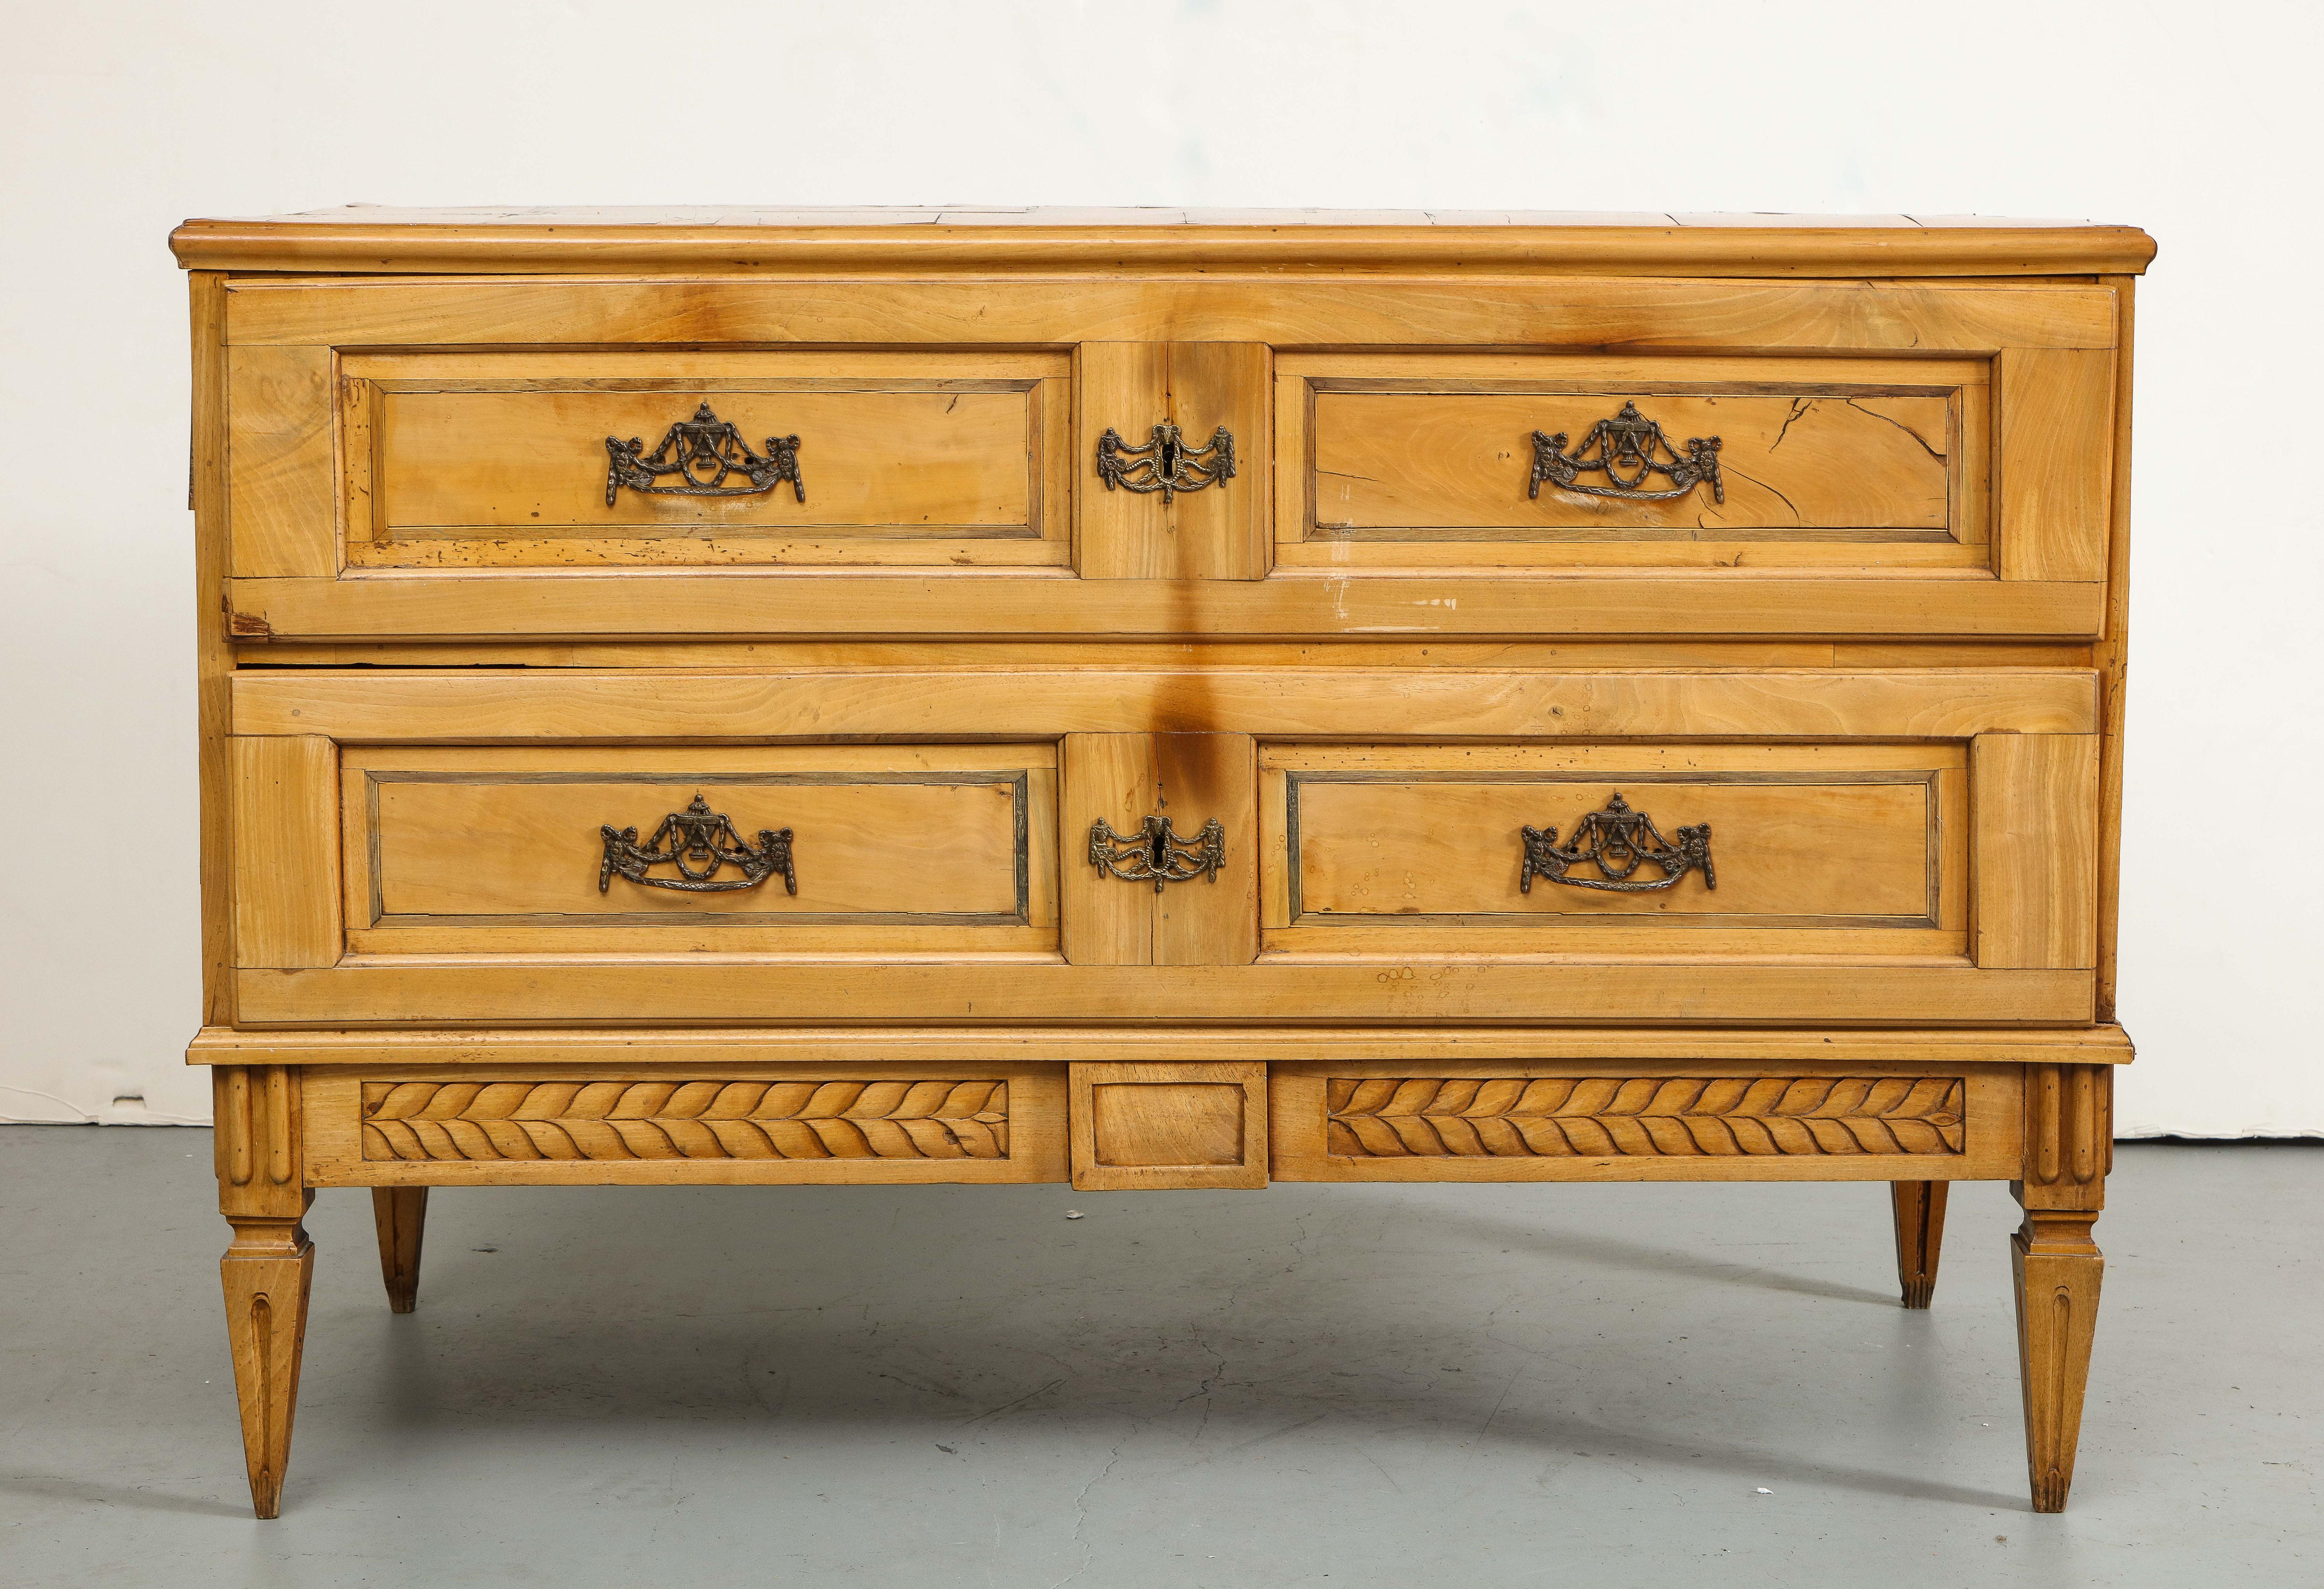 19th Century Louis XVI Style French Oak Chest with Original Bronze Hardware For Sale 5